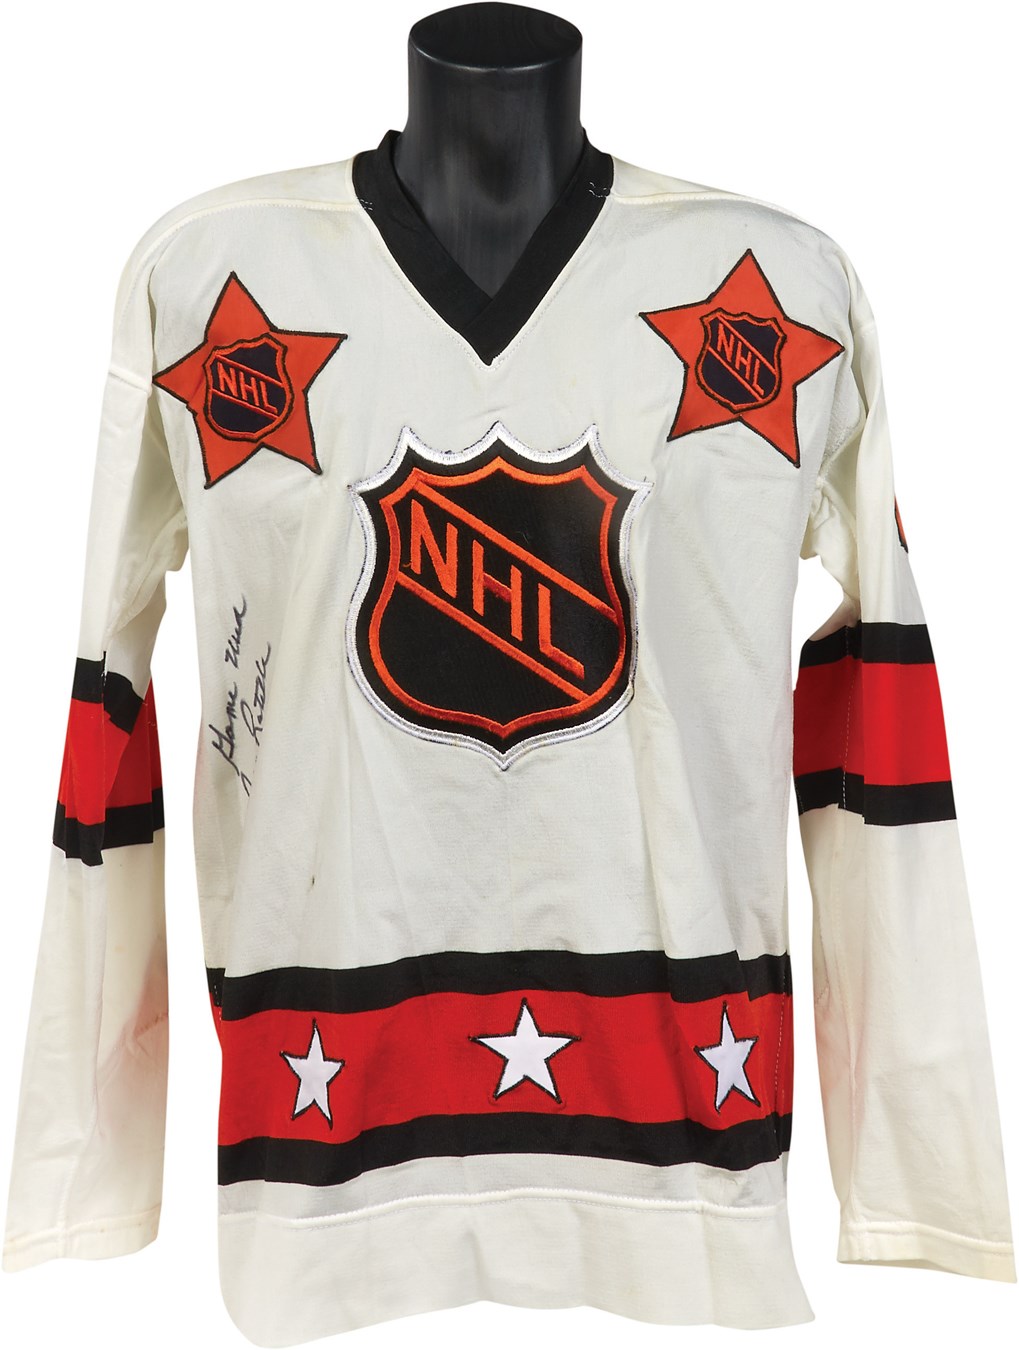 The Great Jean Ratelle Hockey Collection - 1973 Jean Ratelle NHL All-Star Game Worn Jersey (Photomatched)